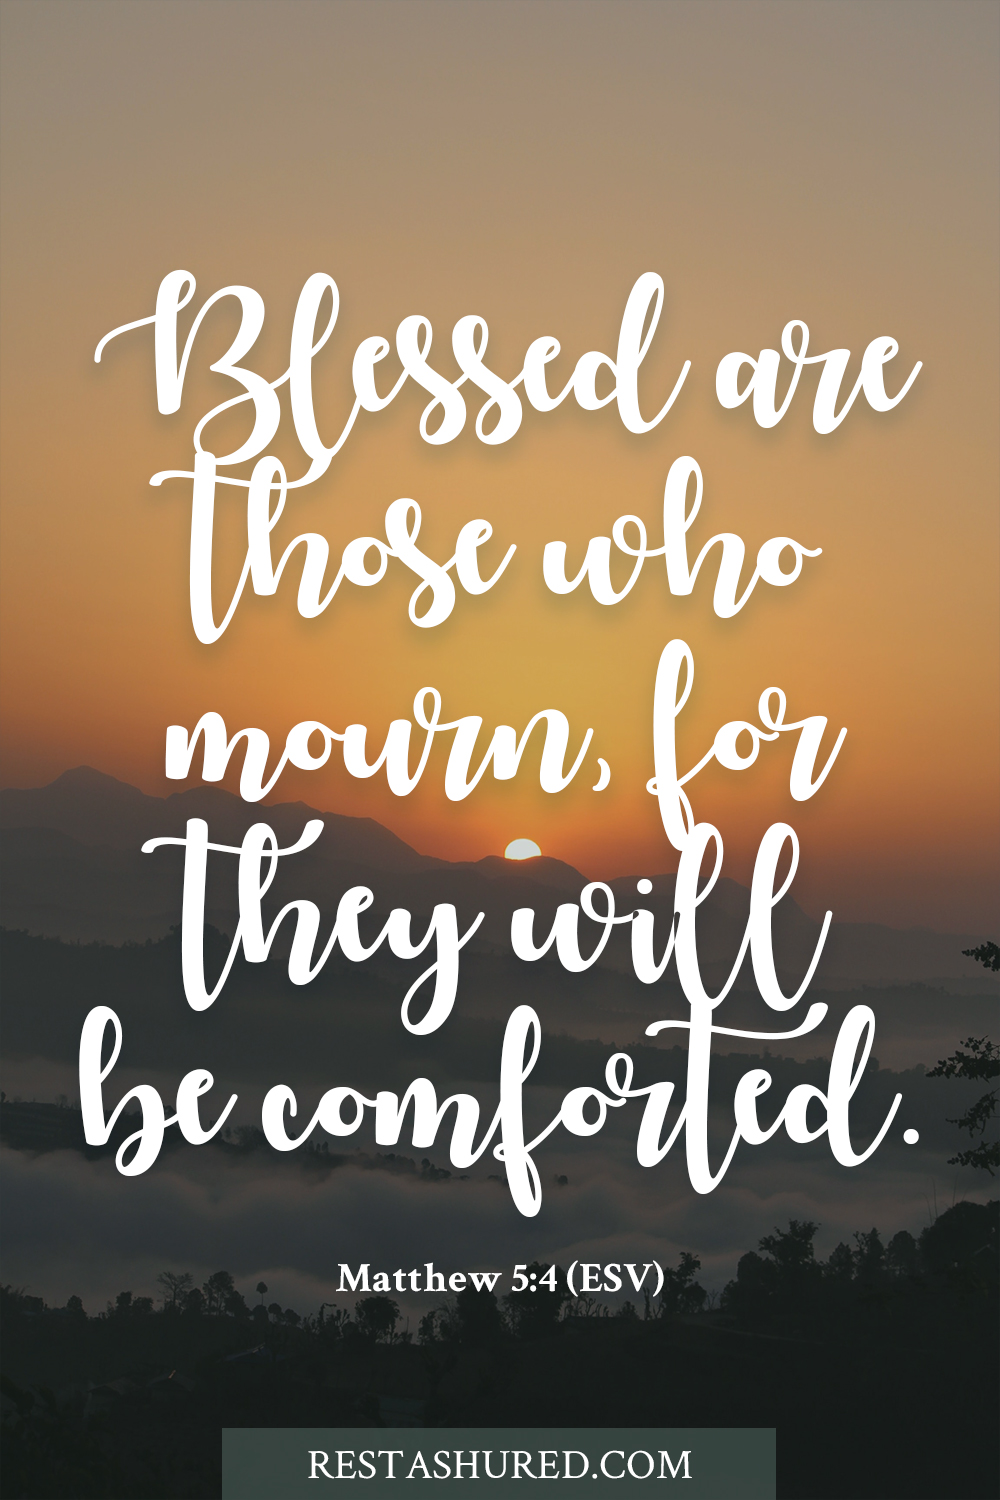 Matthew 5:4 - Blessed are those who mourn, for they will be comforted.